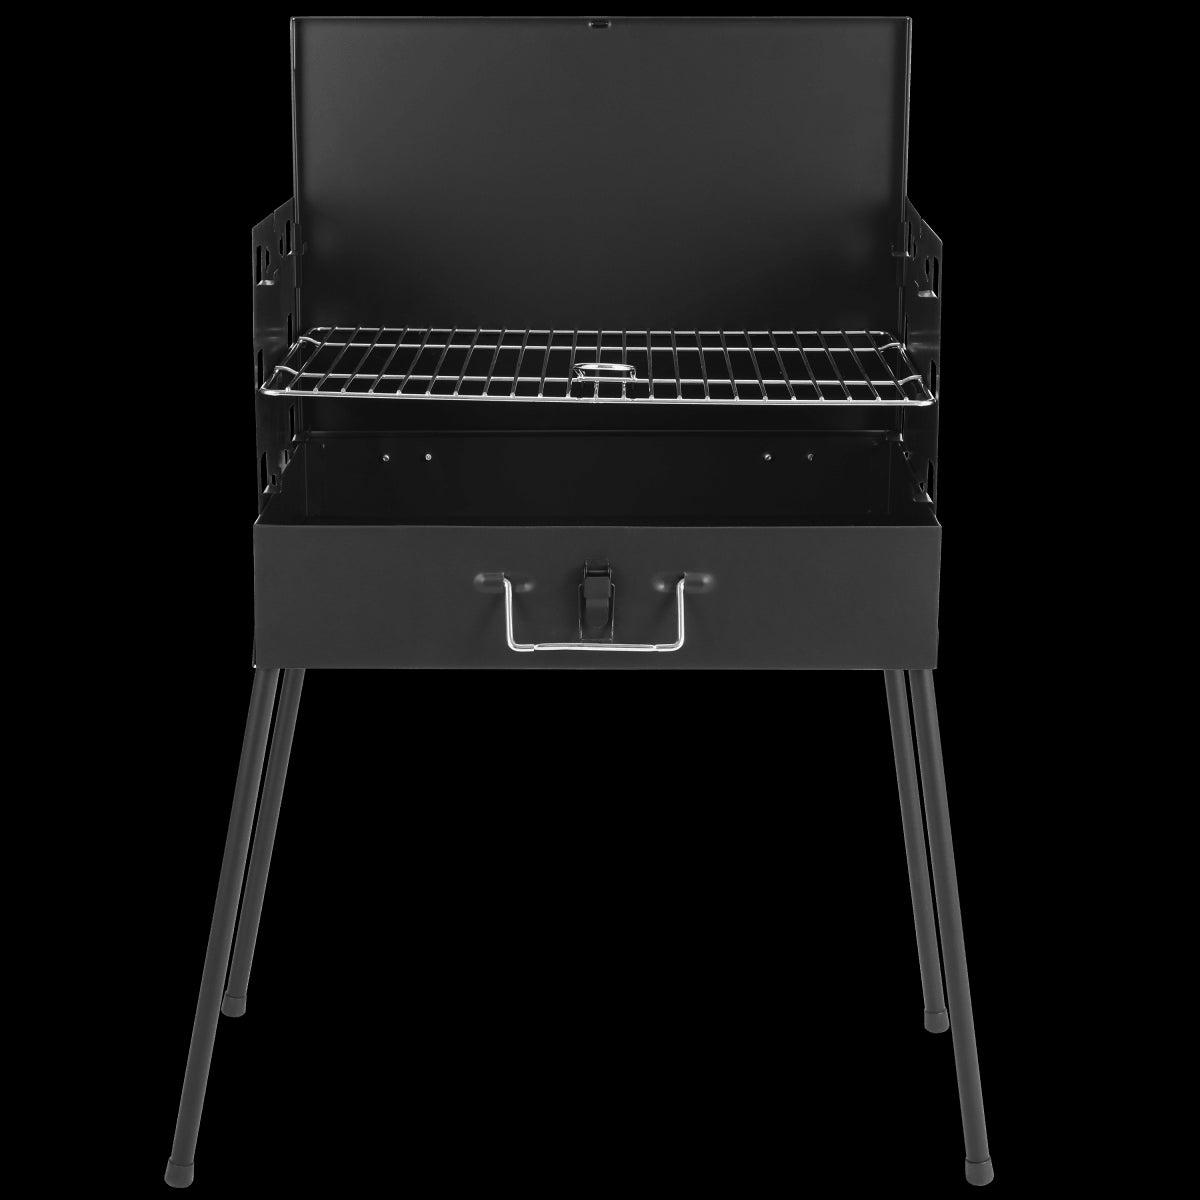 CAMPING BBQ WITH FOLDING LEGS GRILL 45X28